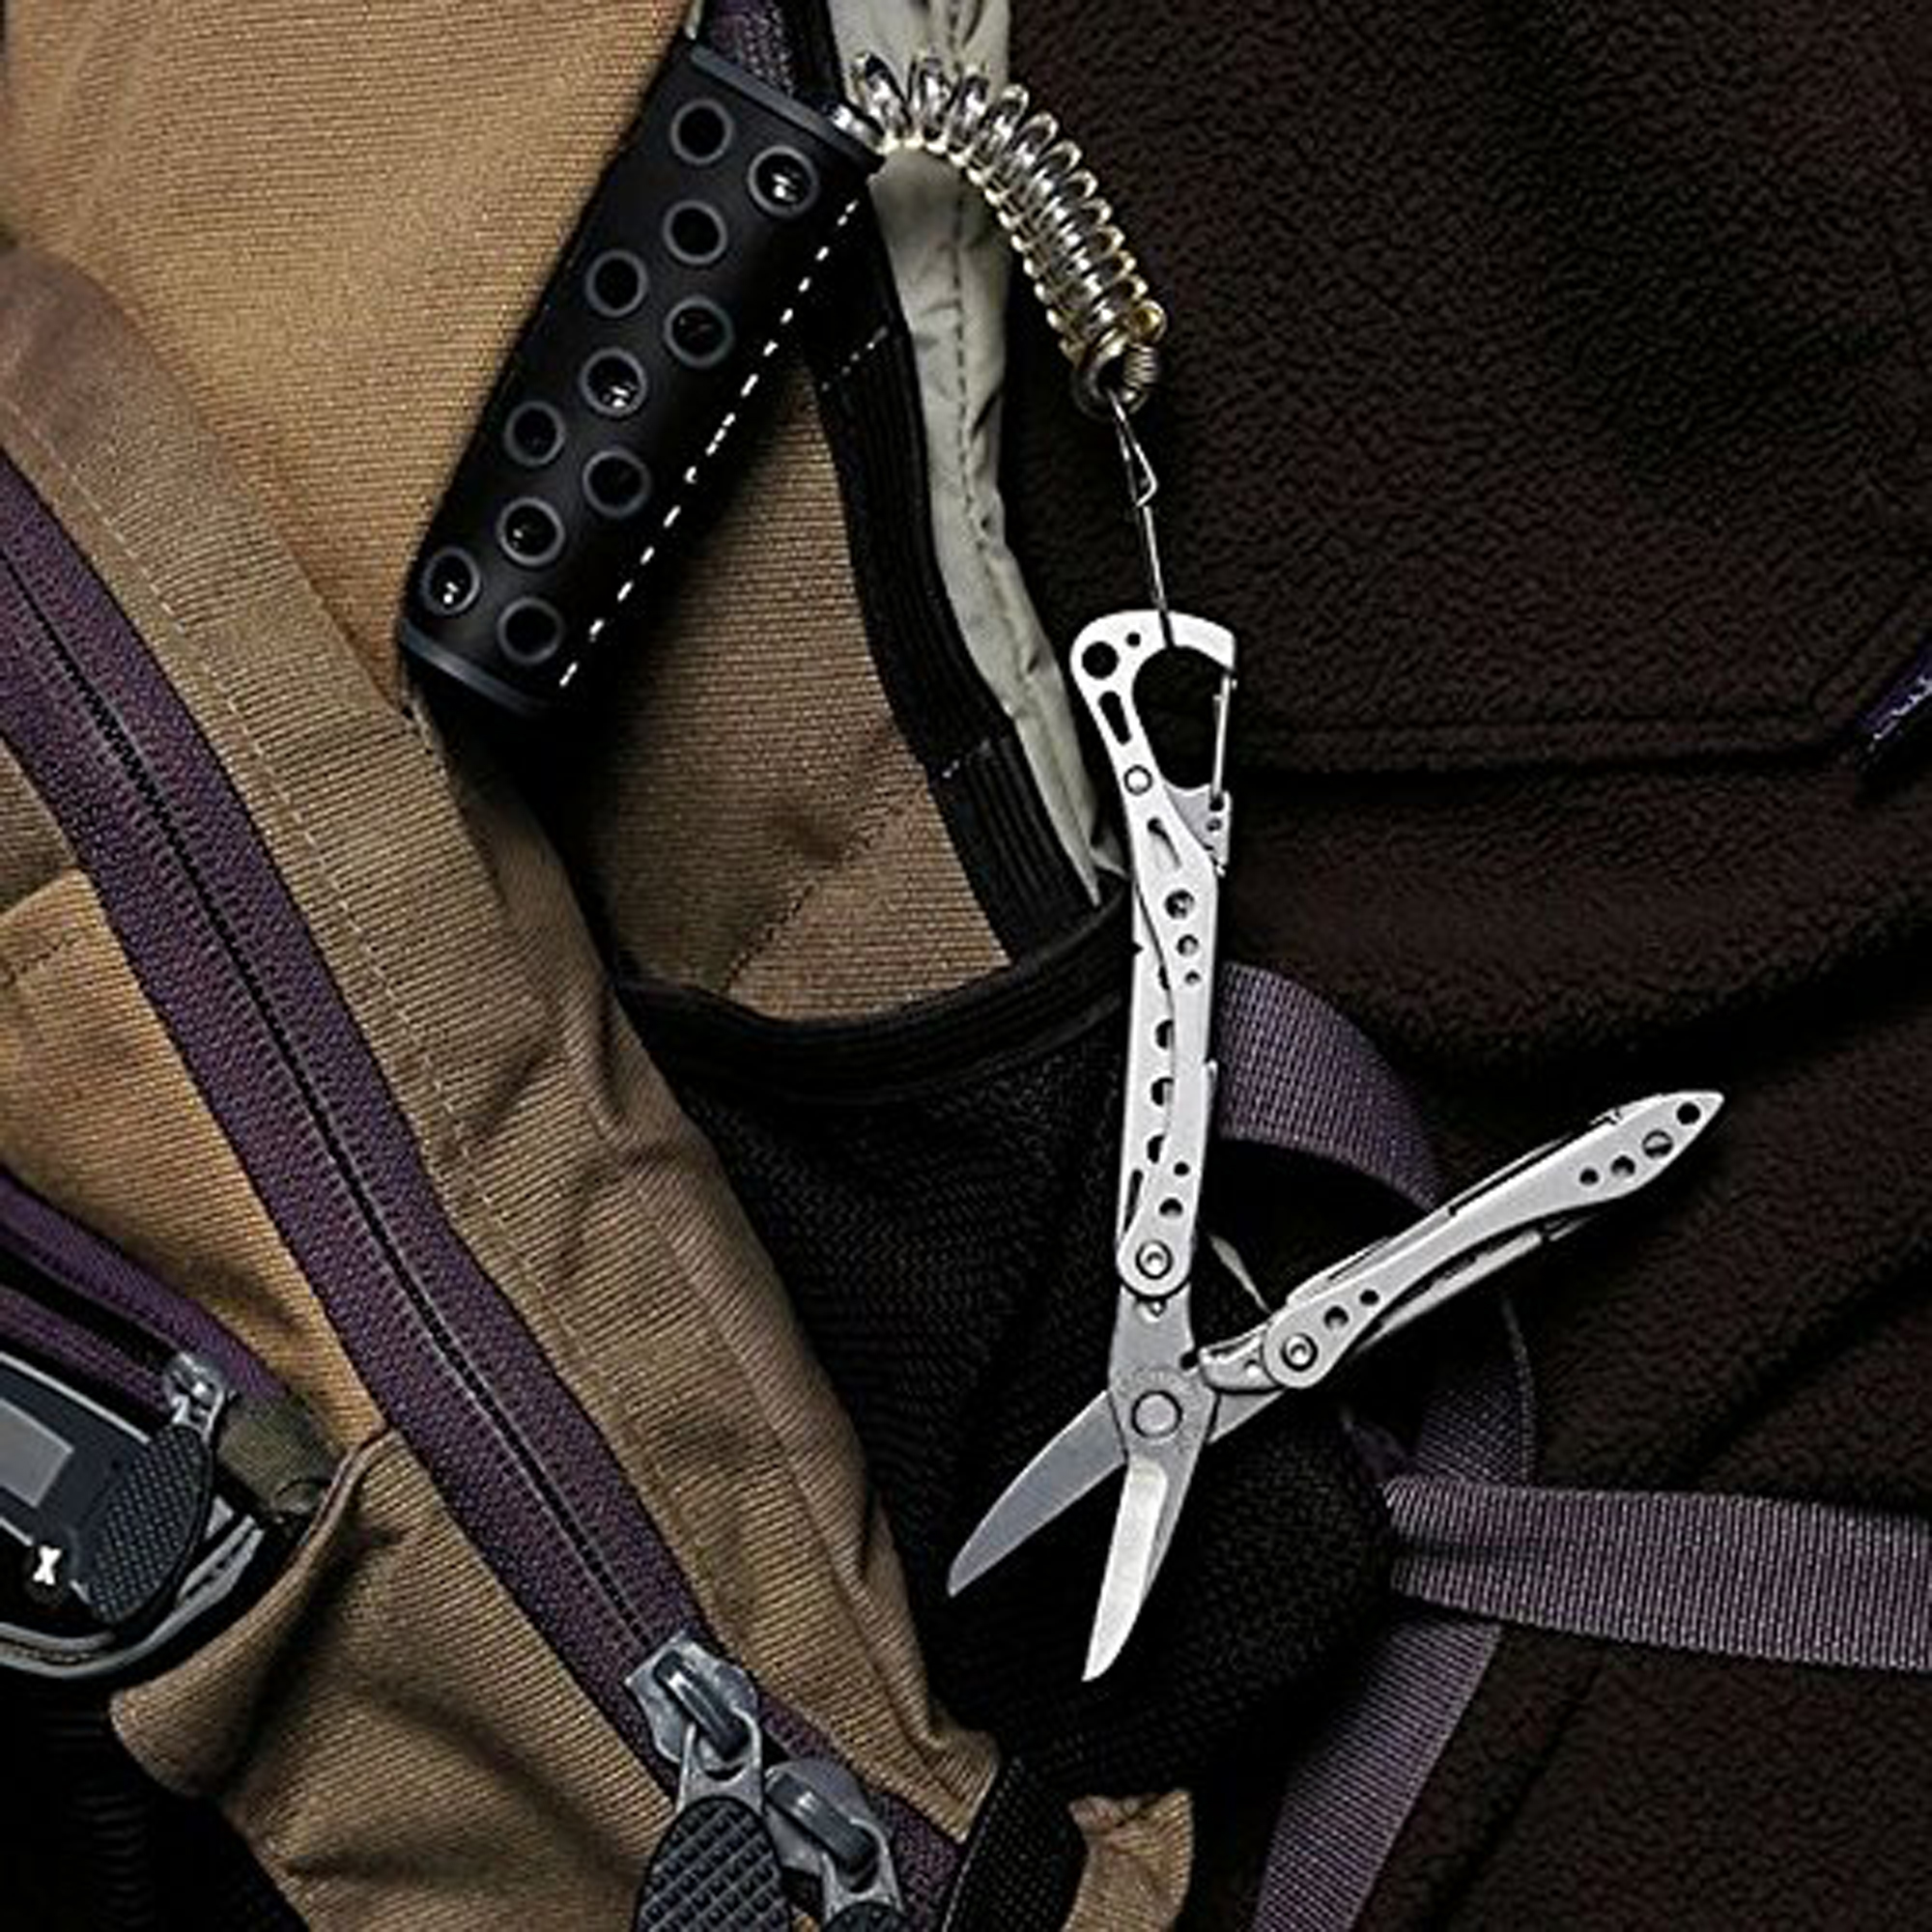 Leatherman, Style CS Keychain Multitool with Spring-Action Scissors and Grooming Tools, Stainless Steel - image 6 of 7